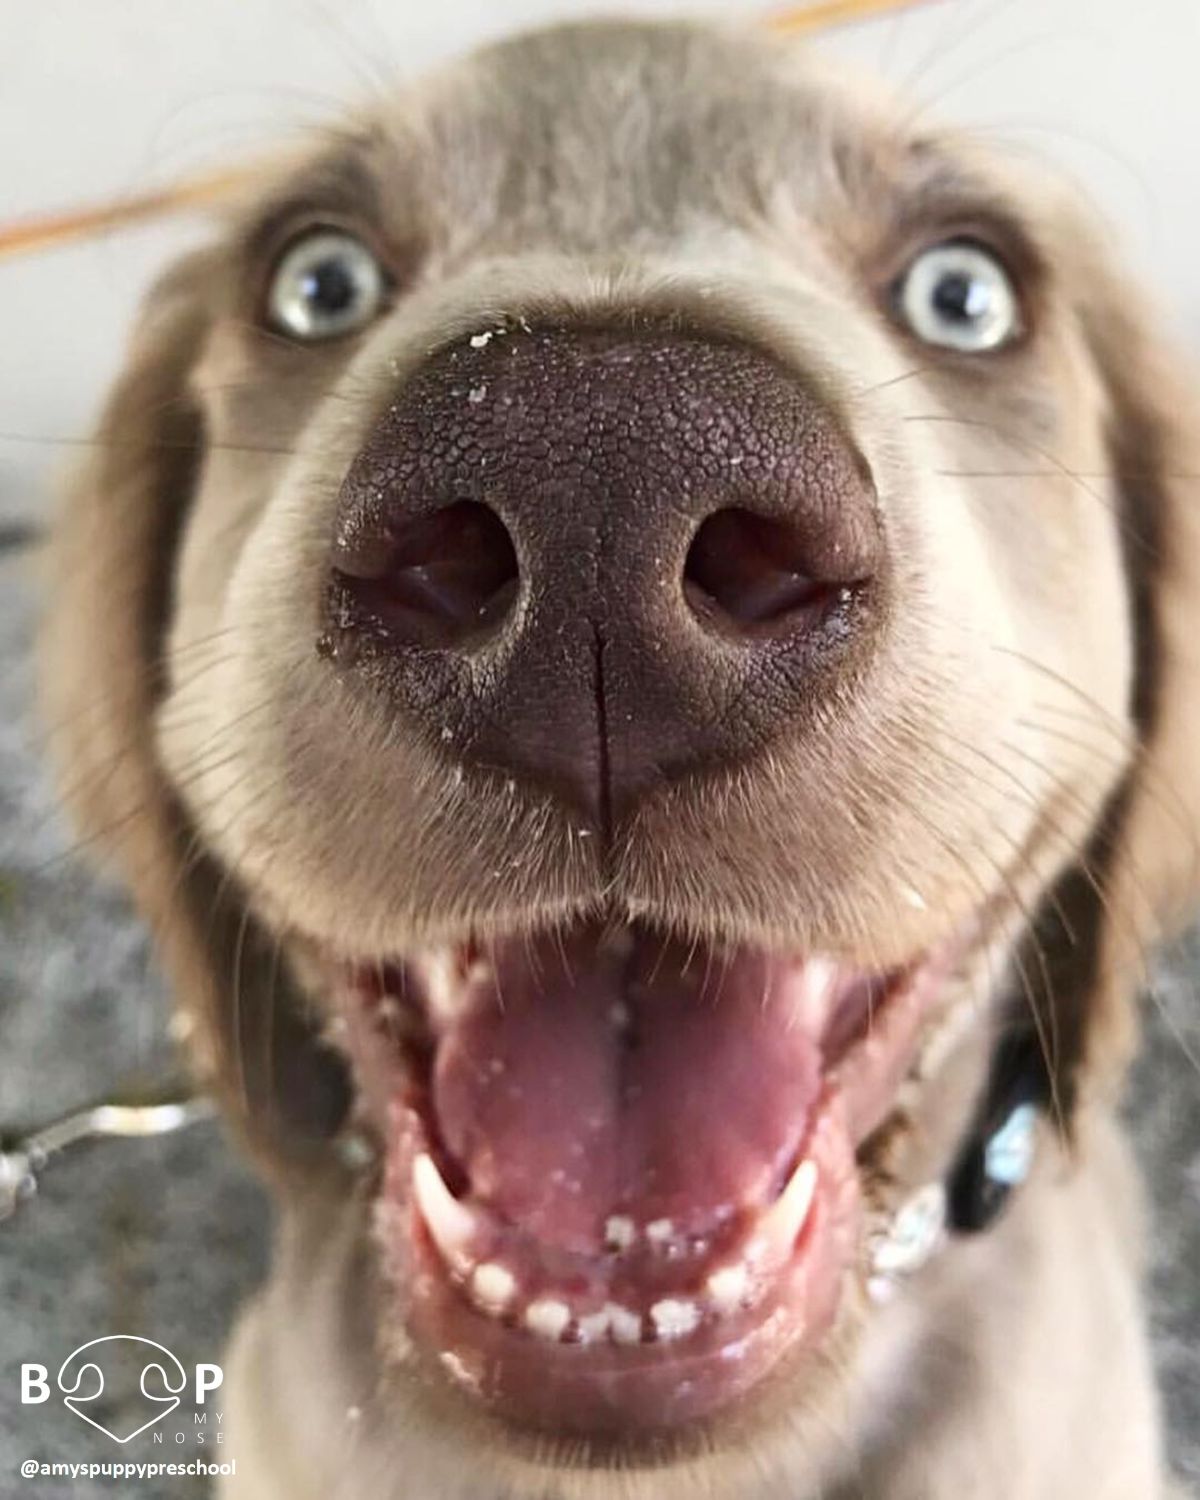 close up of brown dog's face with the mouth open in a smile